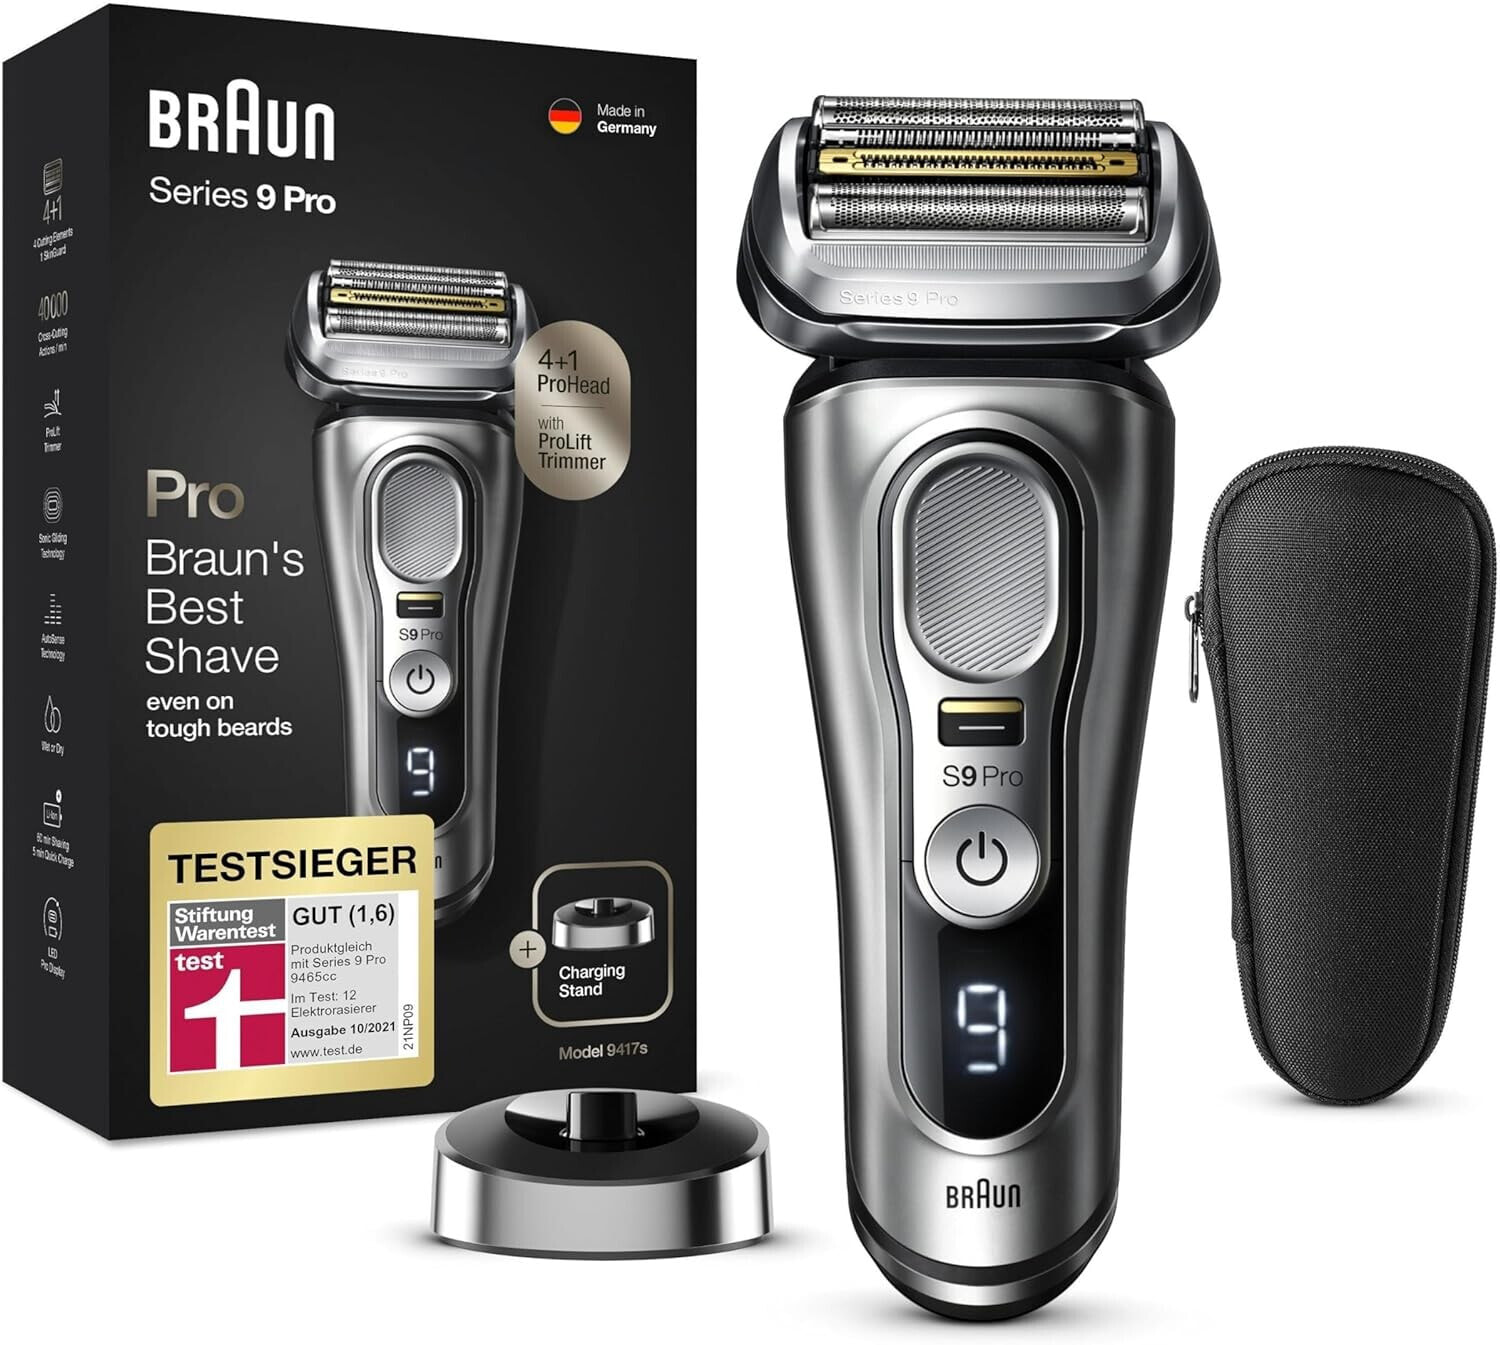 Braun Series 9 Pro Premium shaver men with 4+1 shaving head, electric shaver & ProLift trimmer, PowerCase, 60 min battery life, Wet & Dry for 1, 3 and 7 day beard, 9417s, silver